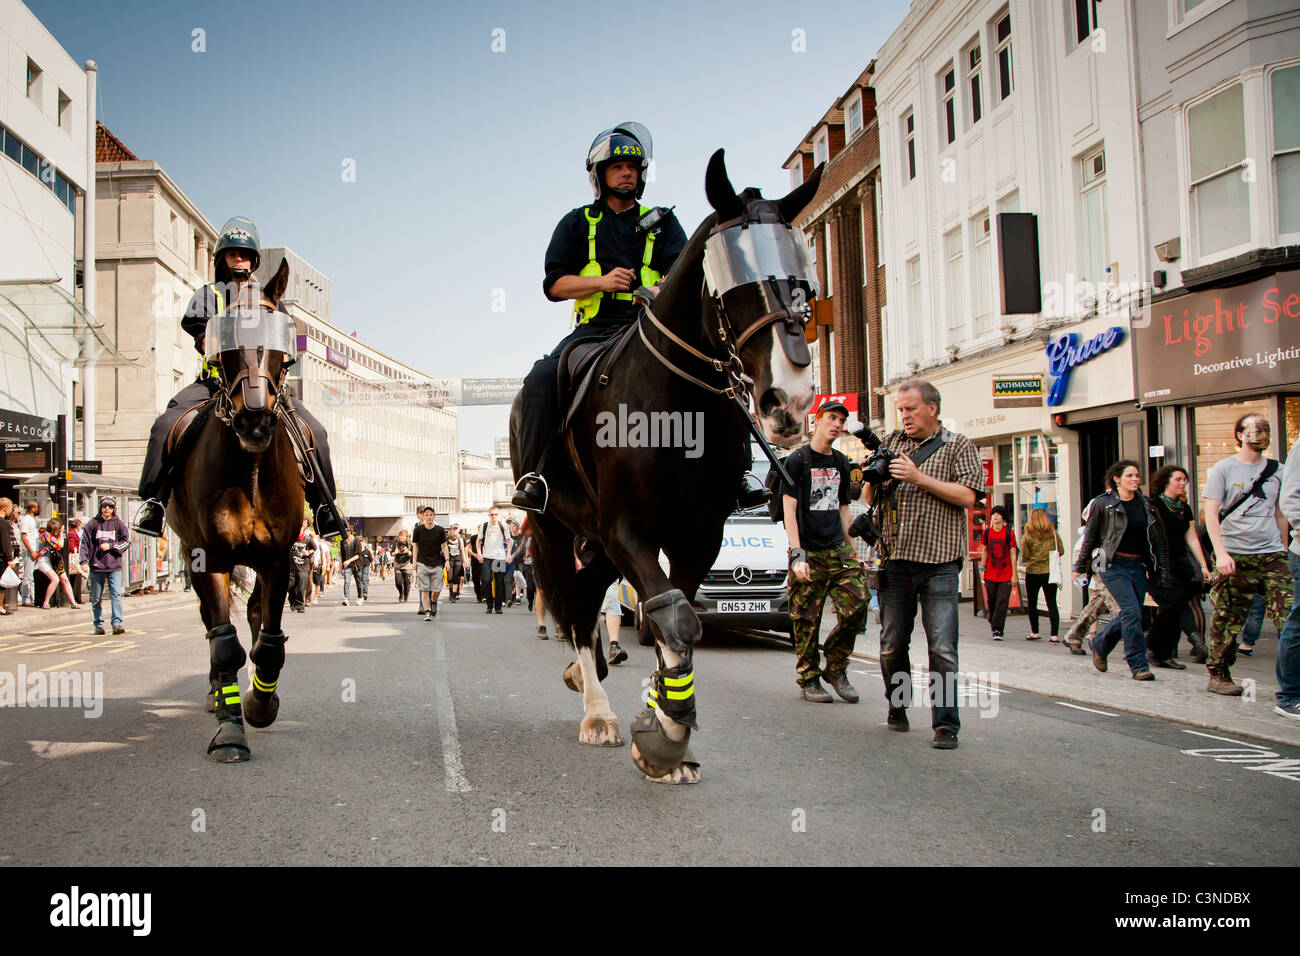 Mounted Police patrol the streets during a protest in Brighton, UK 2011 Stock Photo